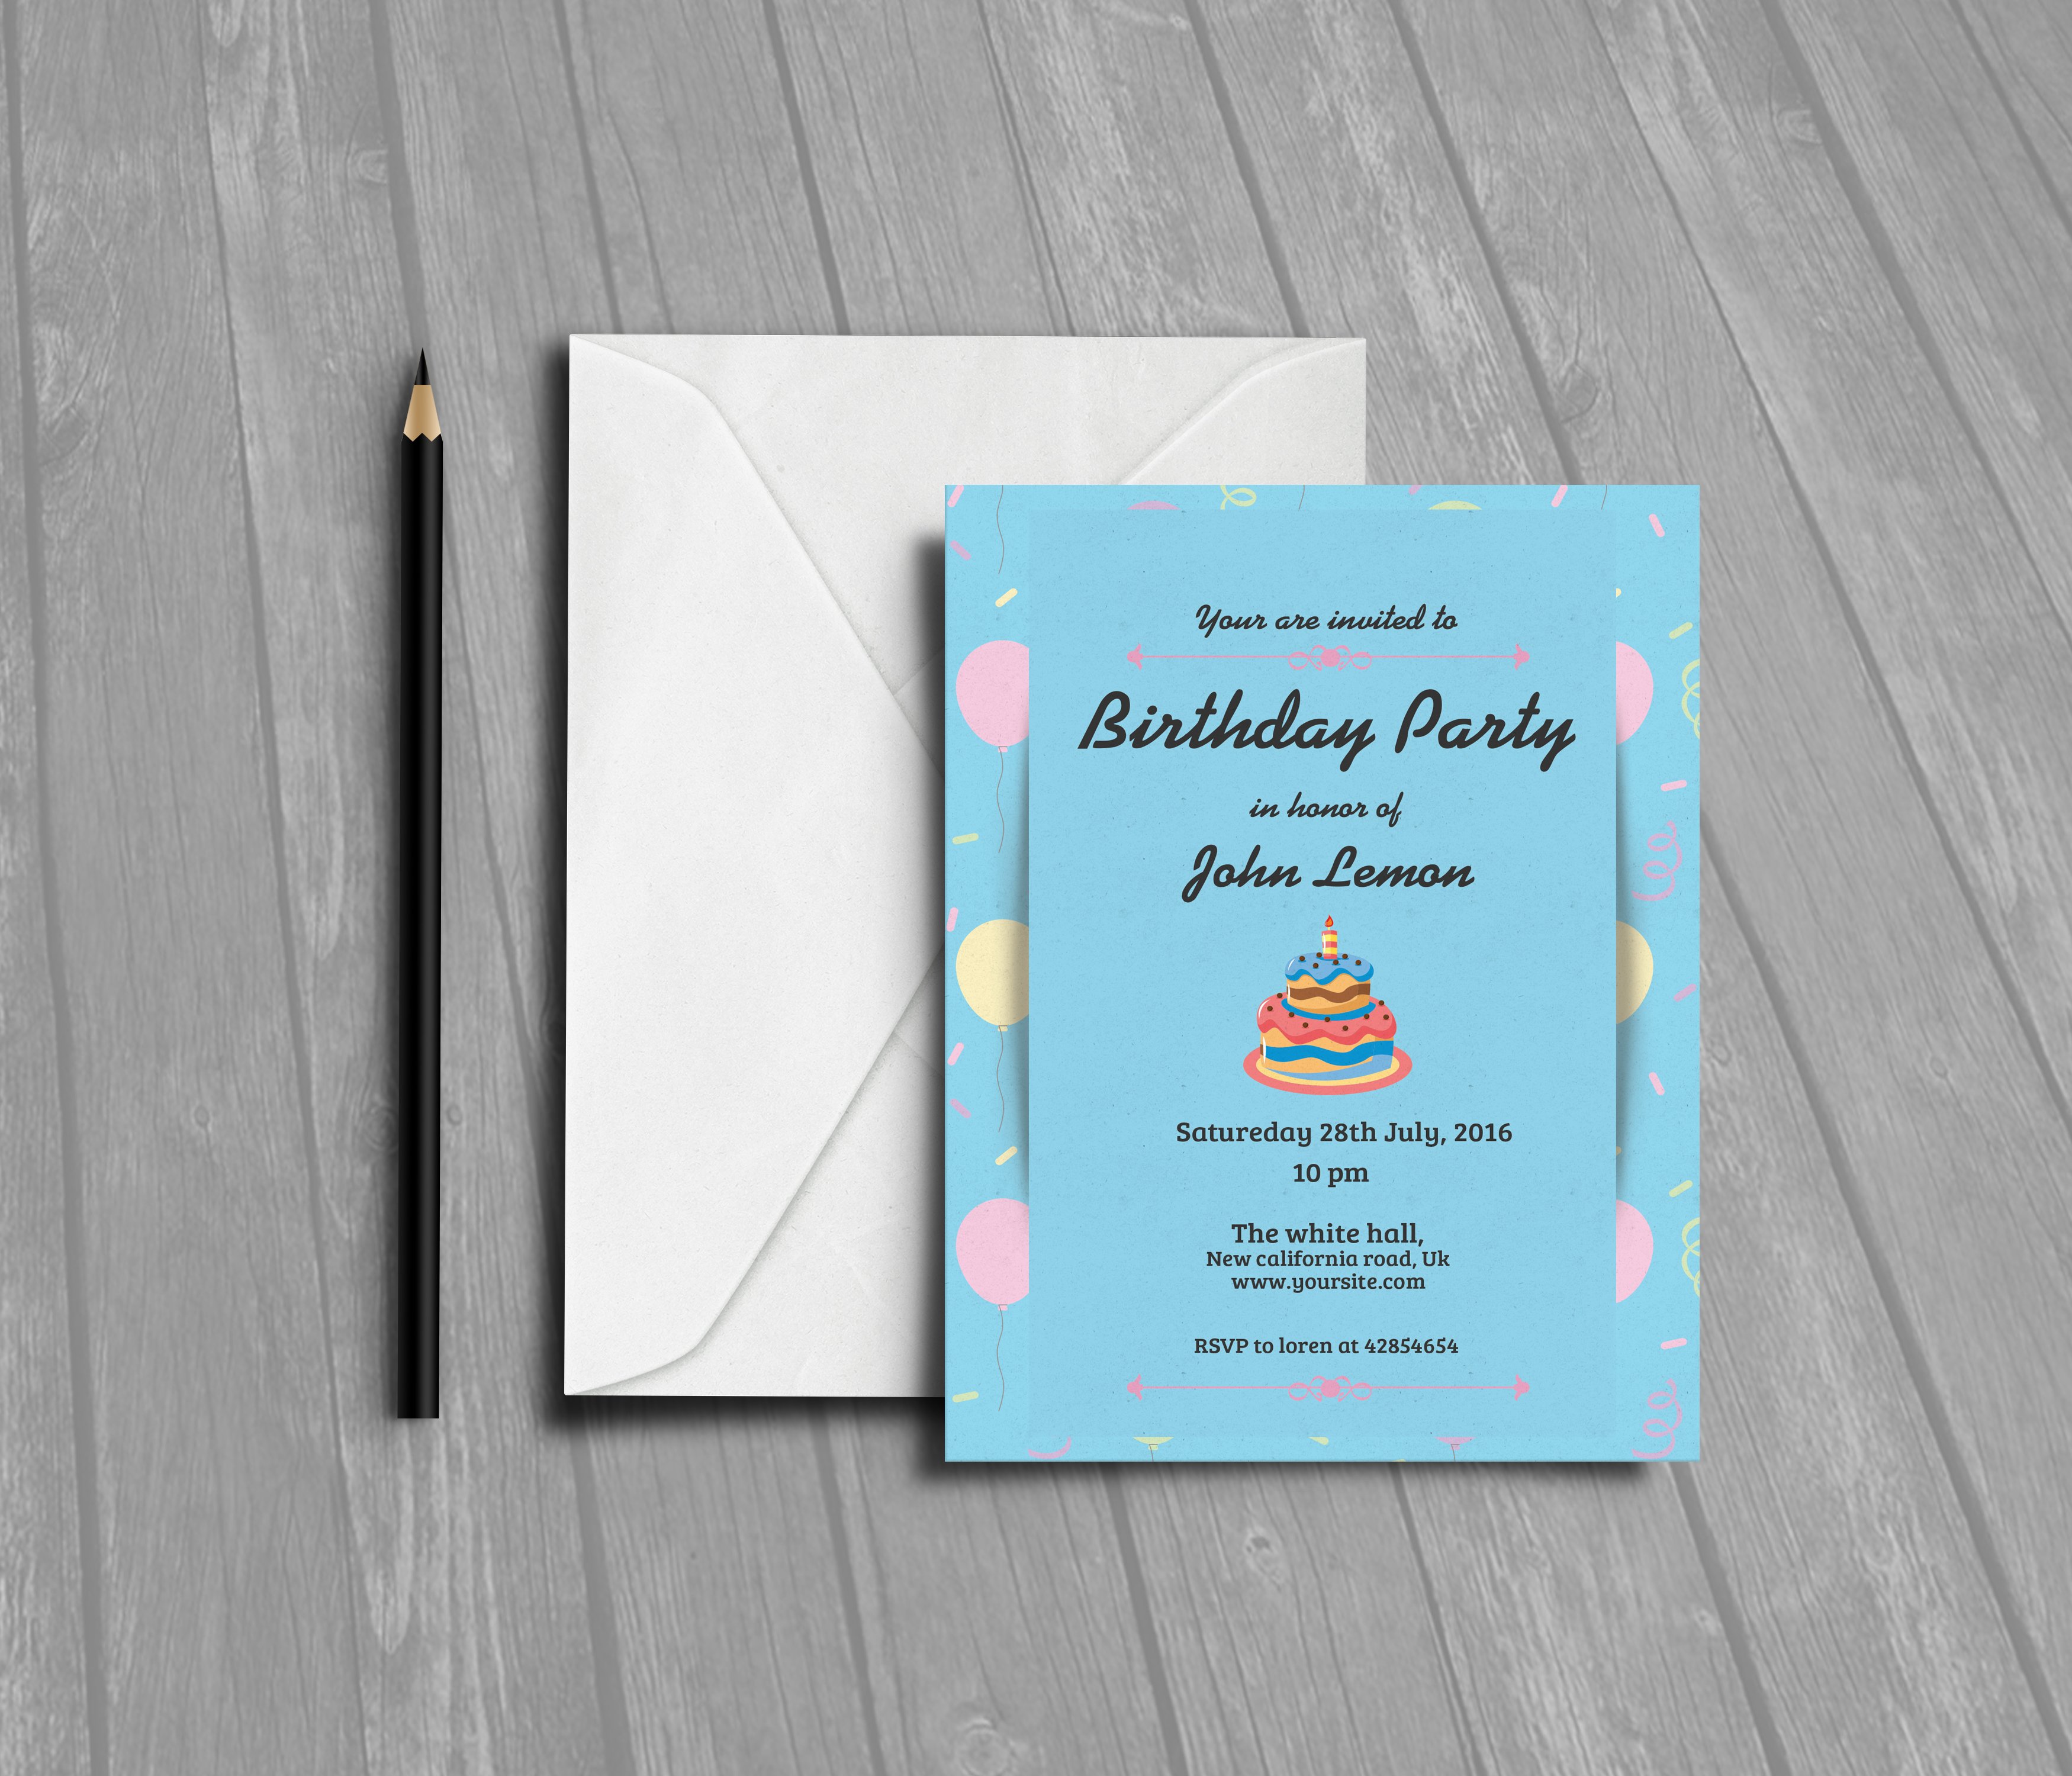 Birthday Party Invitation preview image.